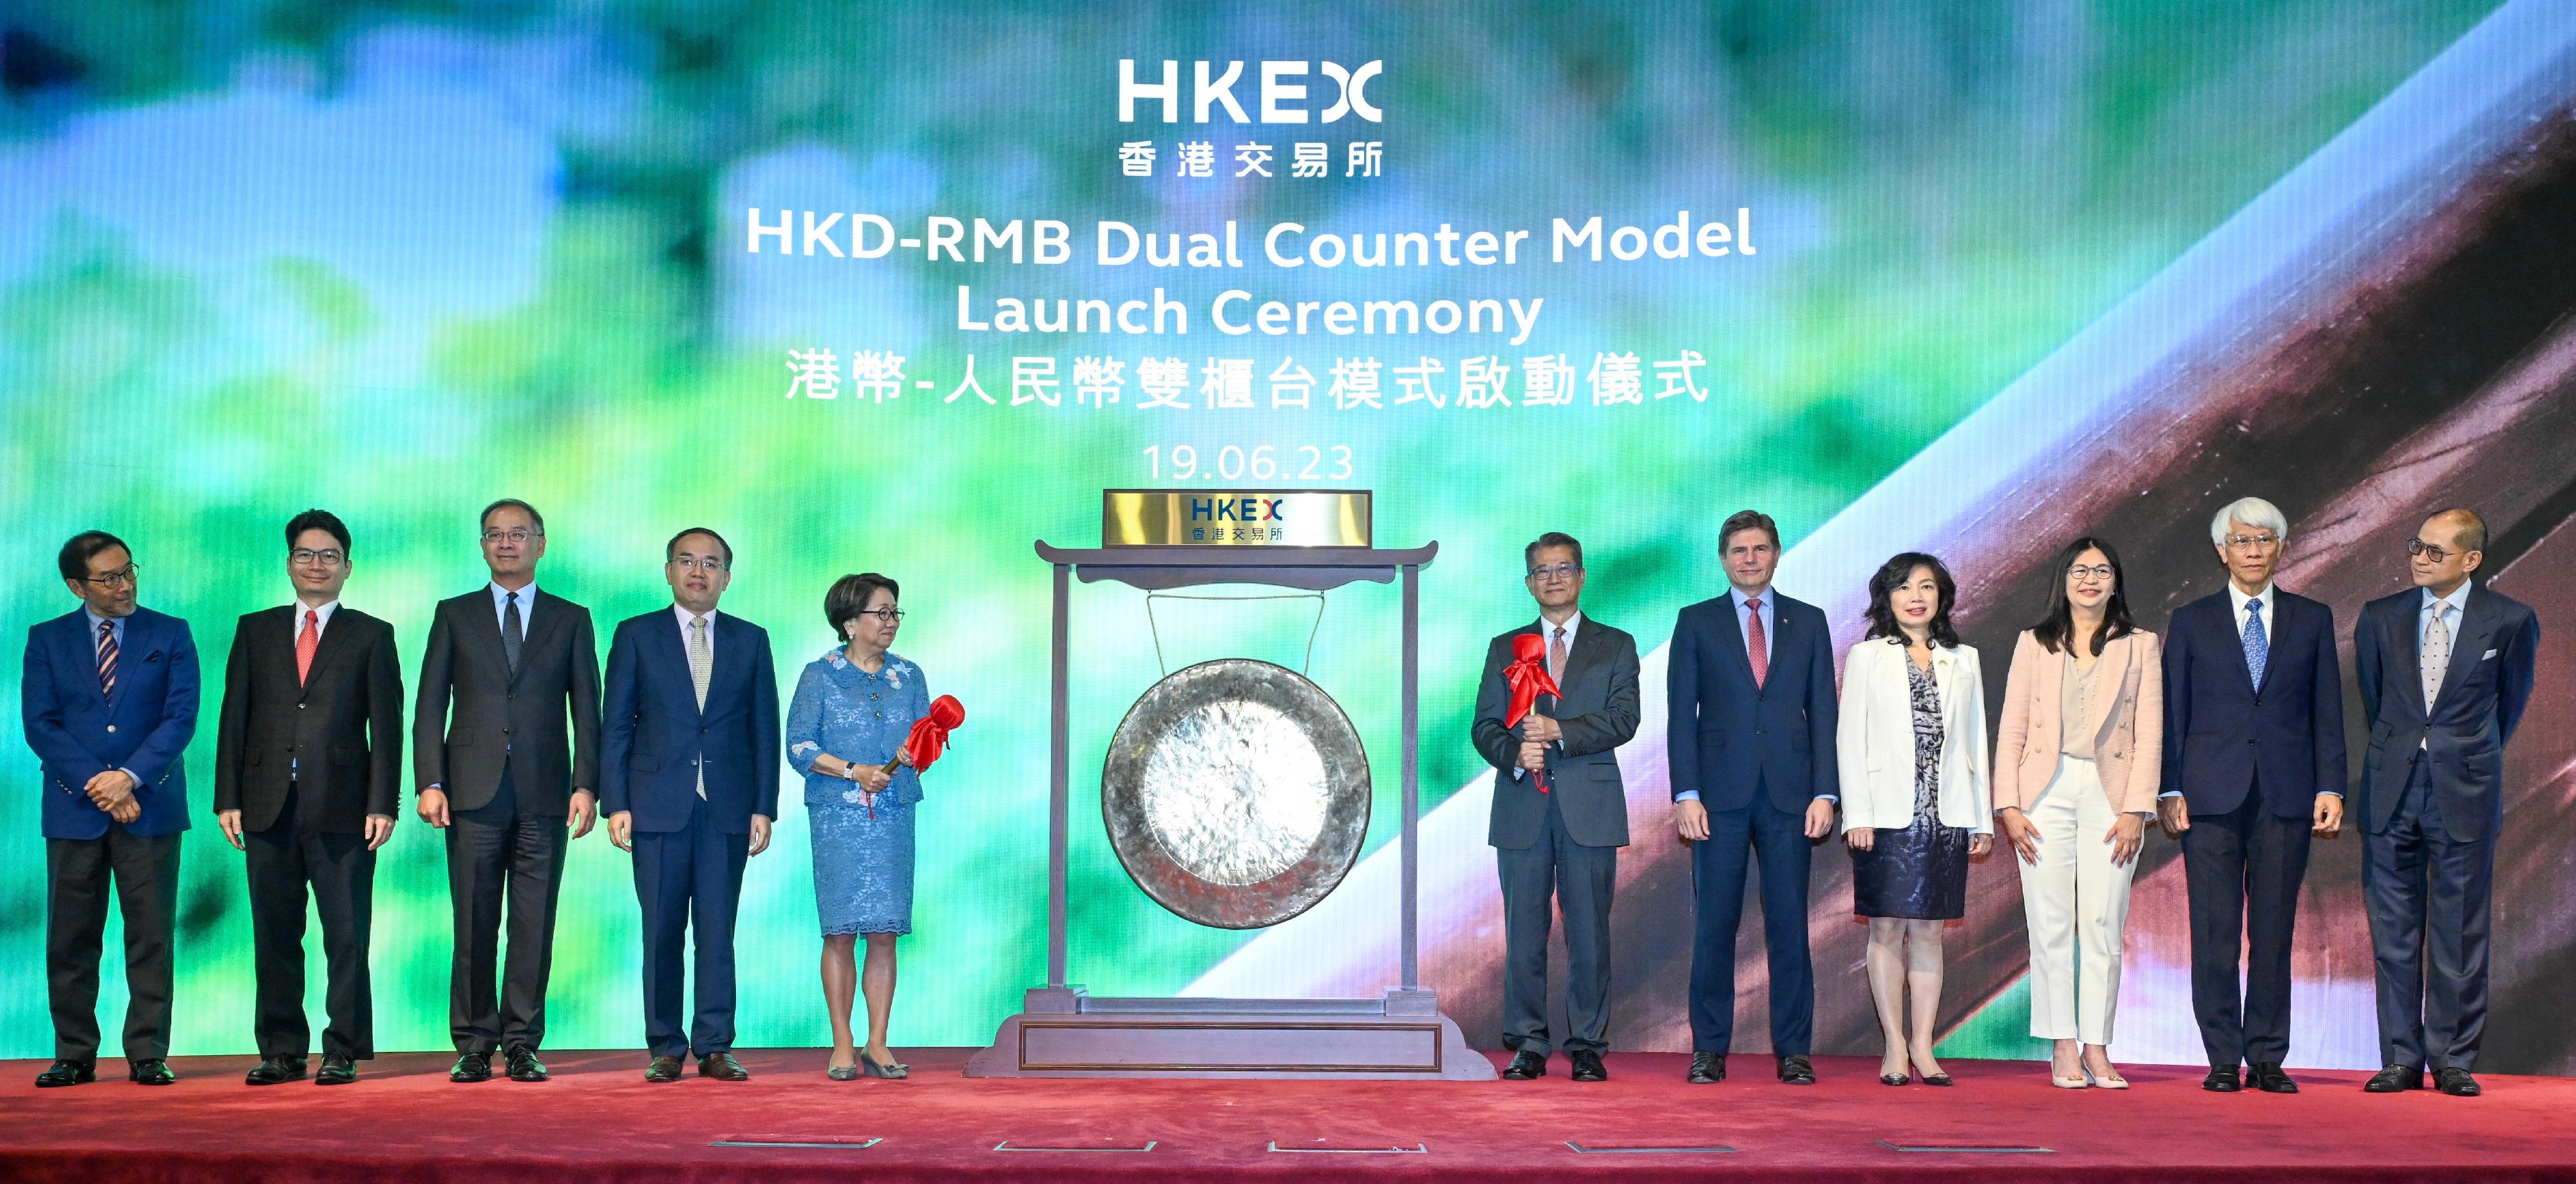 The Financial Secretary, Mr Paul Chan, attended the HKD-RMB Dual Counter Model Launch Ceremony today (June 19). Photo shows (from fourth left) the Secretary for Financial Services and the Treasury, Mr Christopher Hui; the Chairman of the Hong Kong Exchanges and Clearing Limited (HKEX), Mrs Laura Cha; Mr Chan; the Chief Executive Officer of the HKEX, Mr Nicolas Aguzin, and other guests at the ceremony.